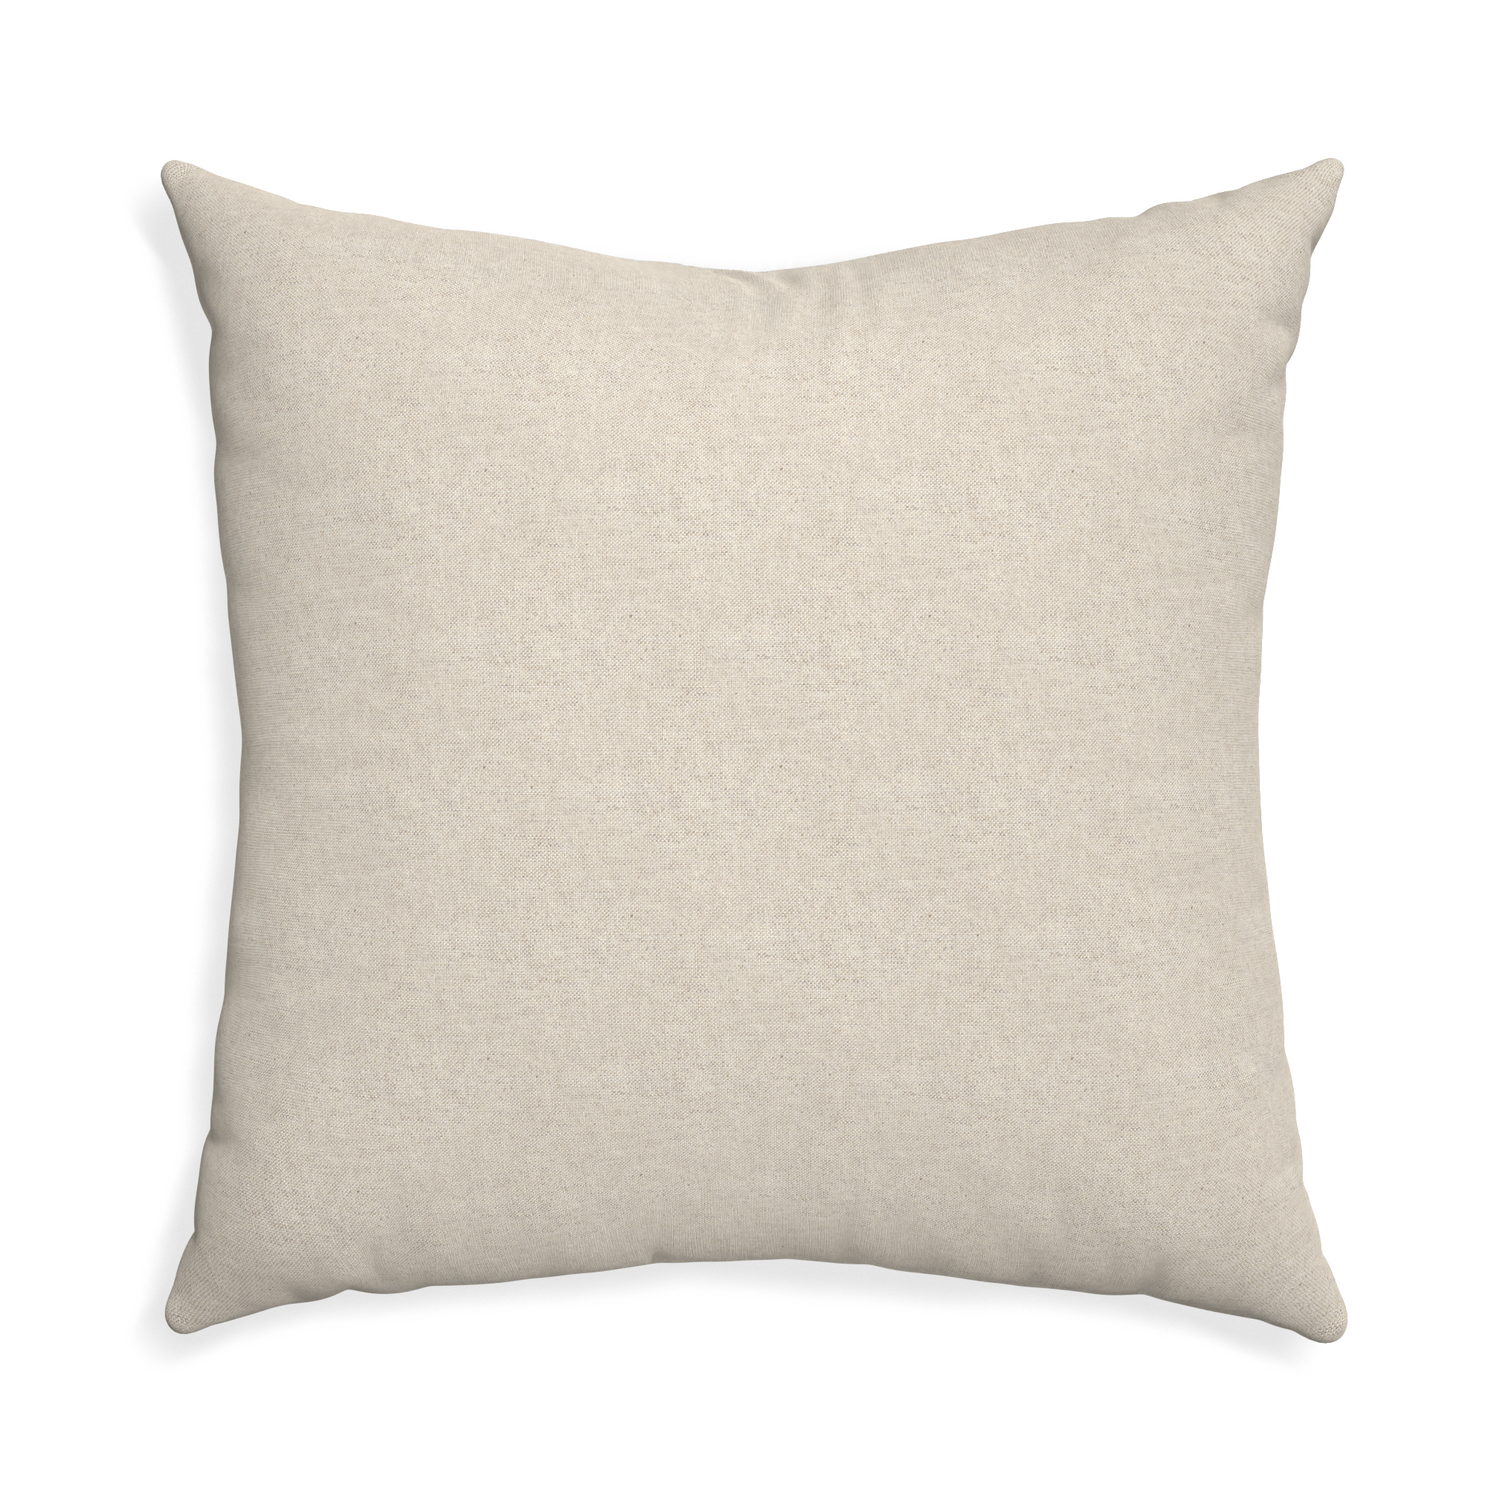 Euro-sham oat custom pillow with none on white background